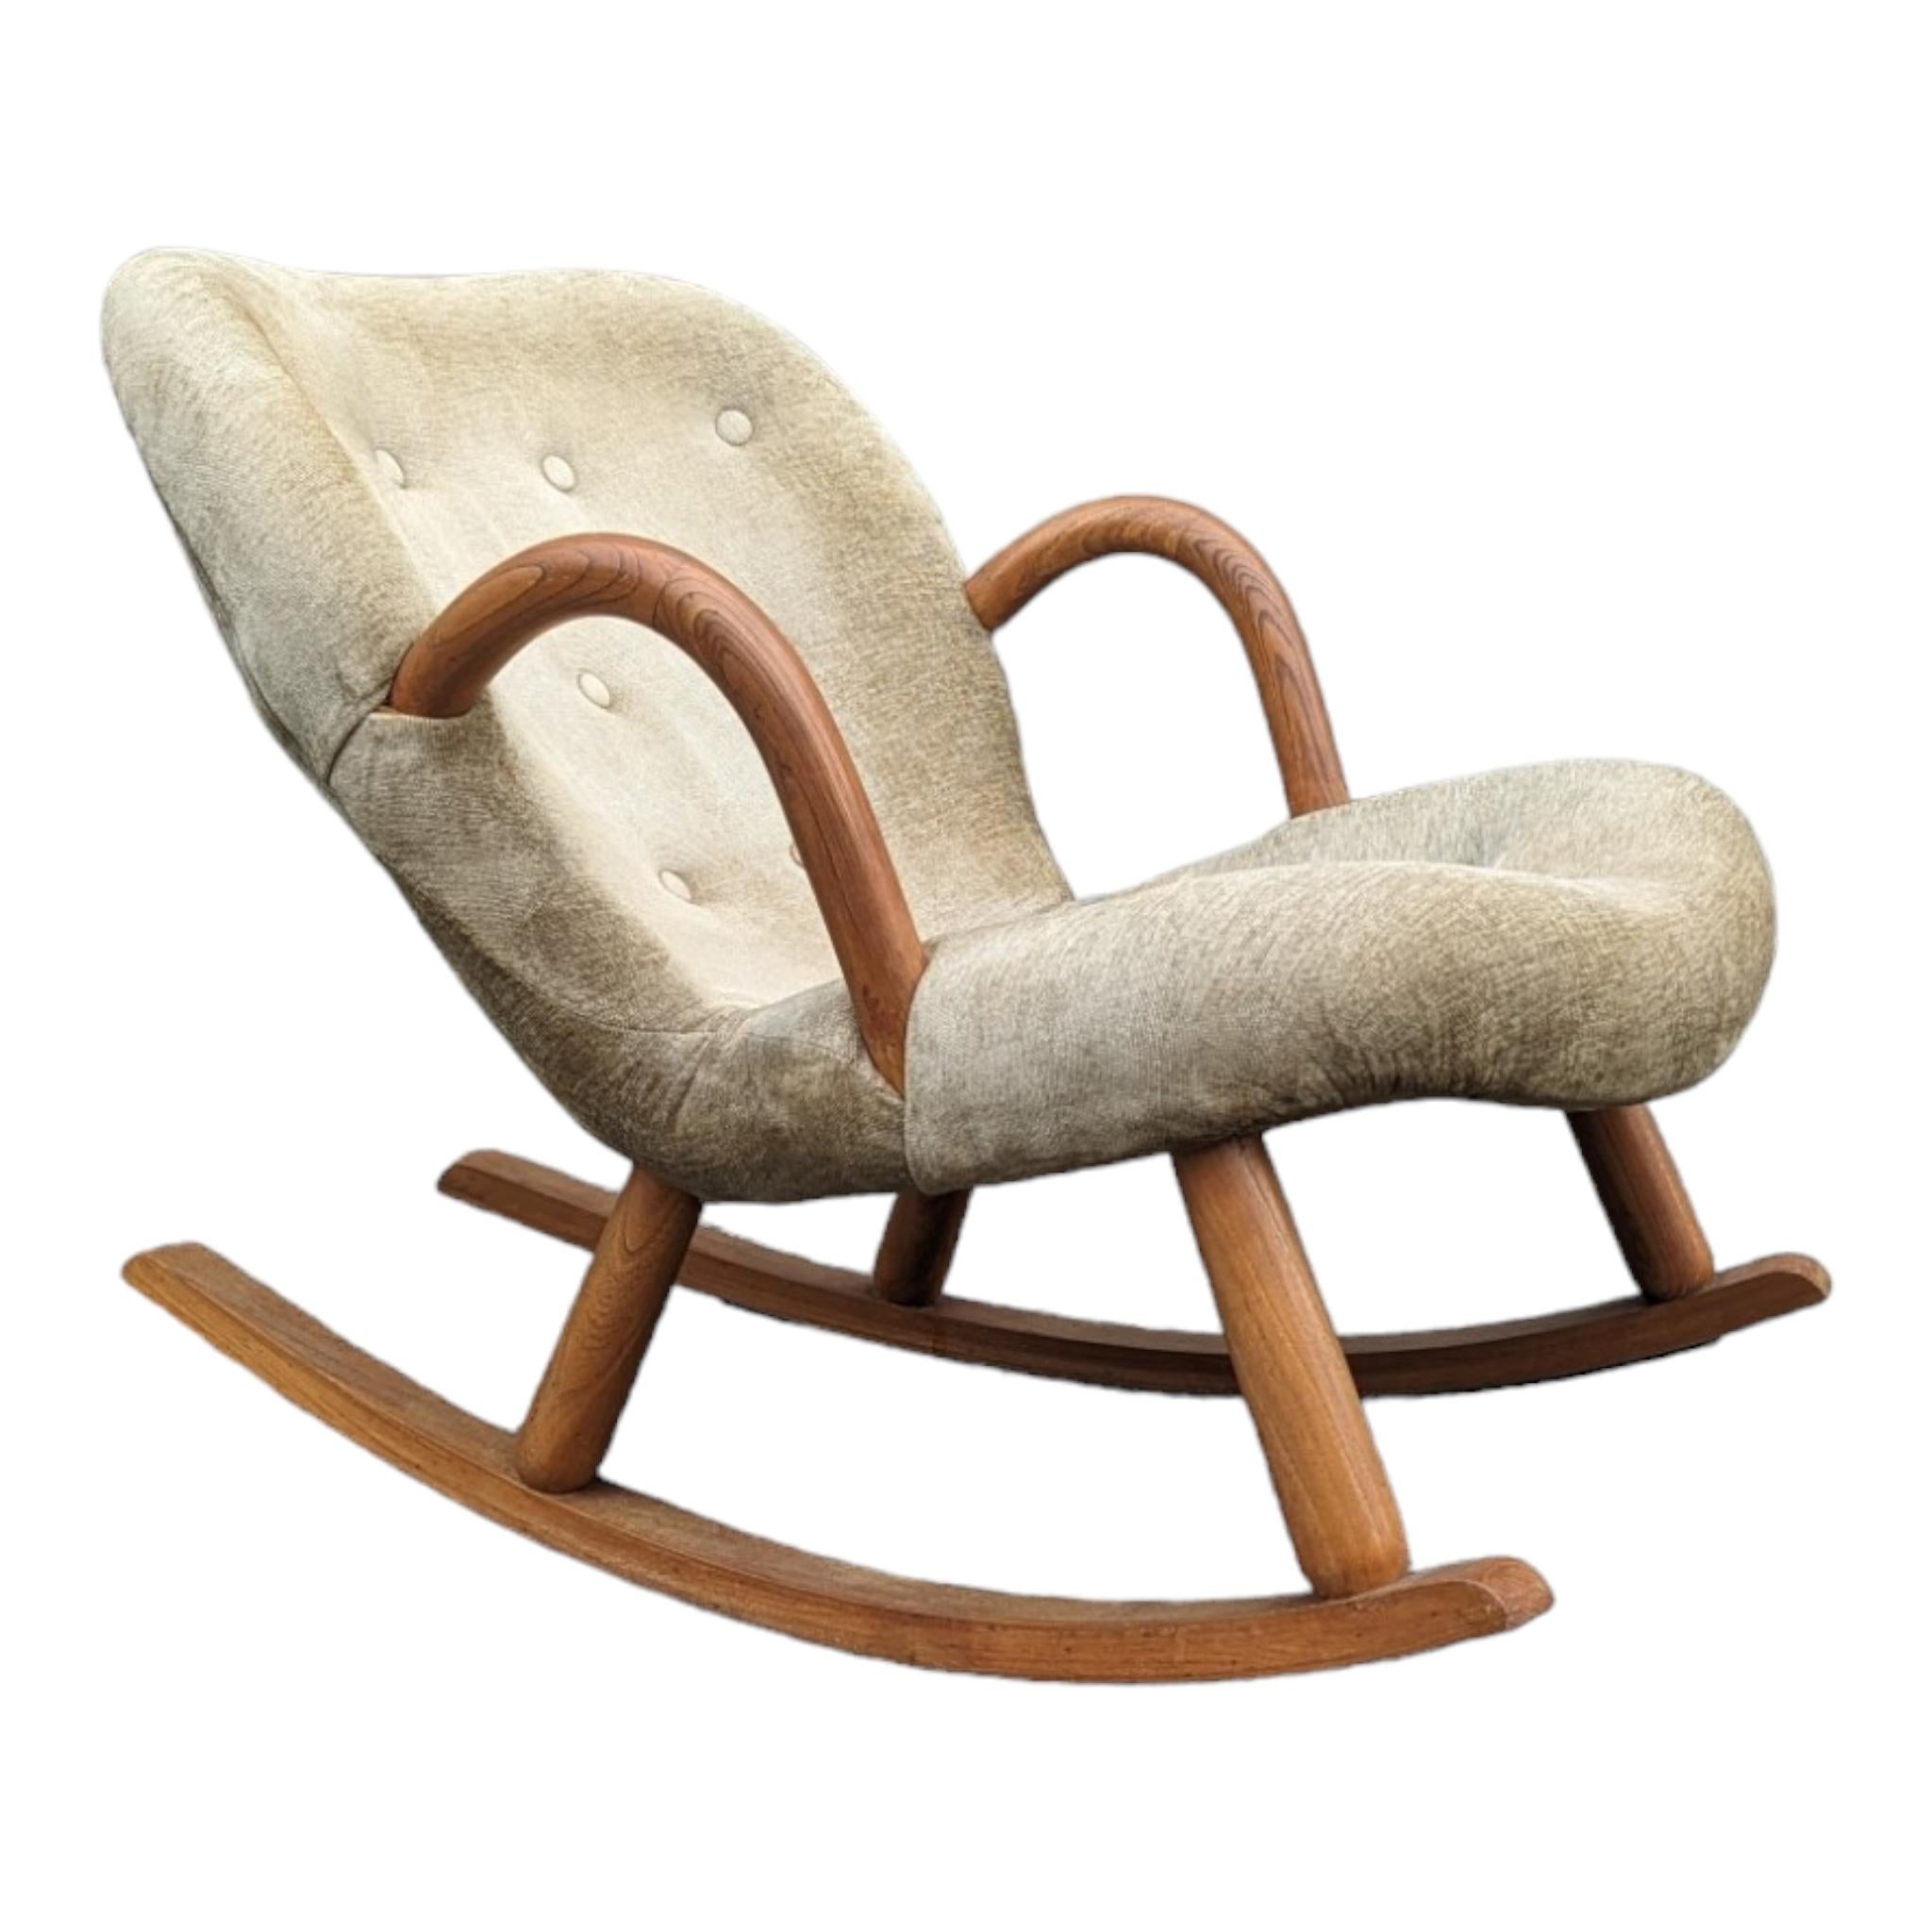 Rare Arnold Madsen Attributed Clam Rocking Chair circa 1960s In Good Condition For Sale In PORT MELBOURNE, AU